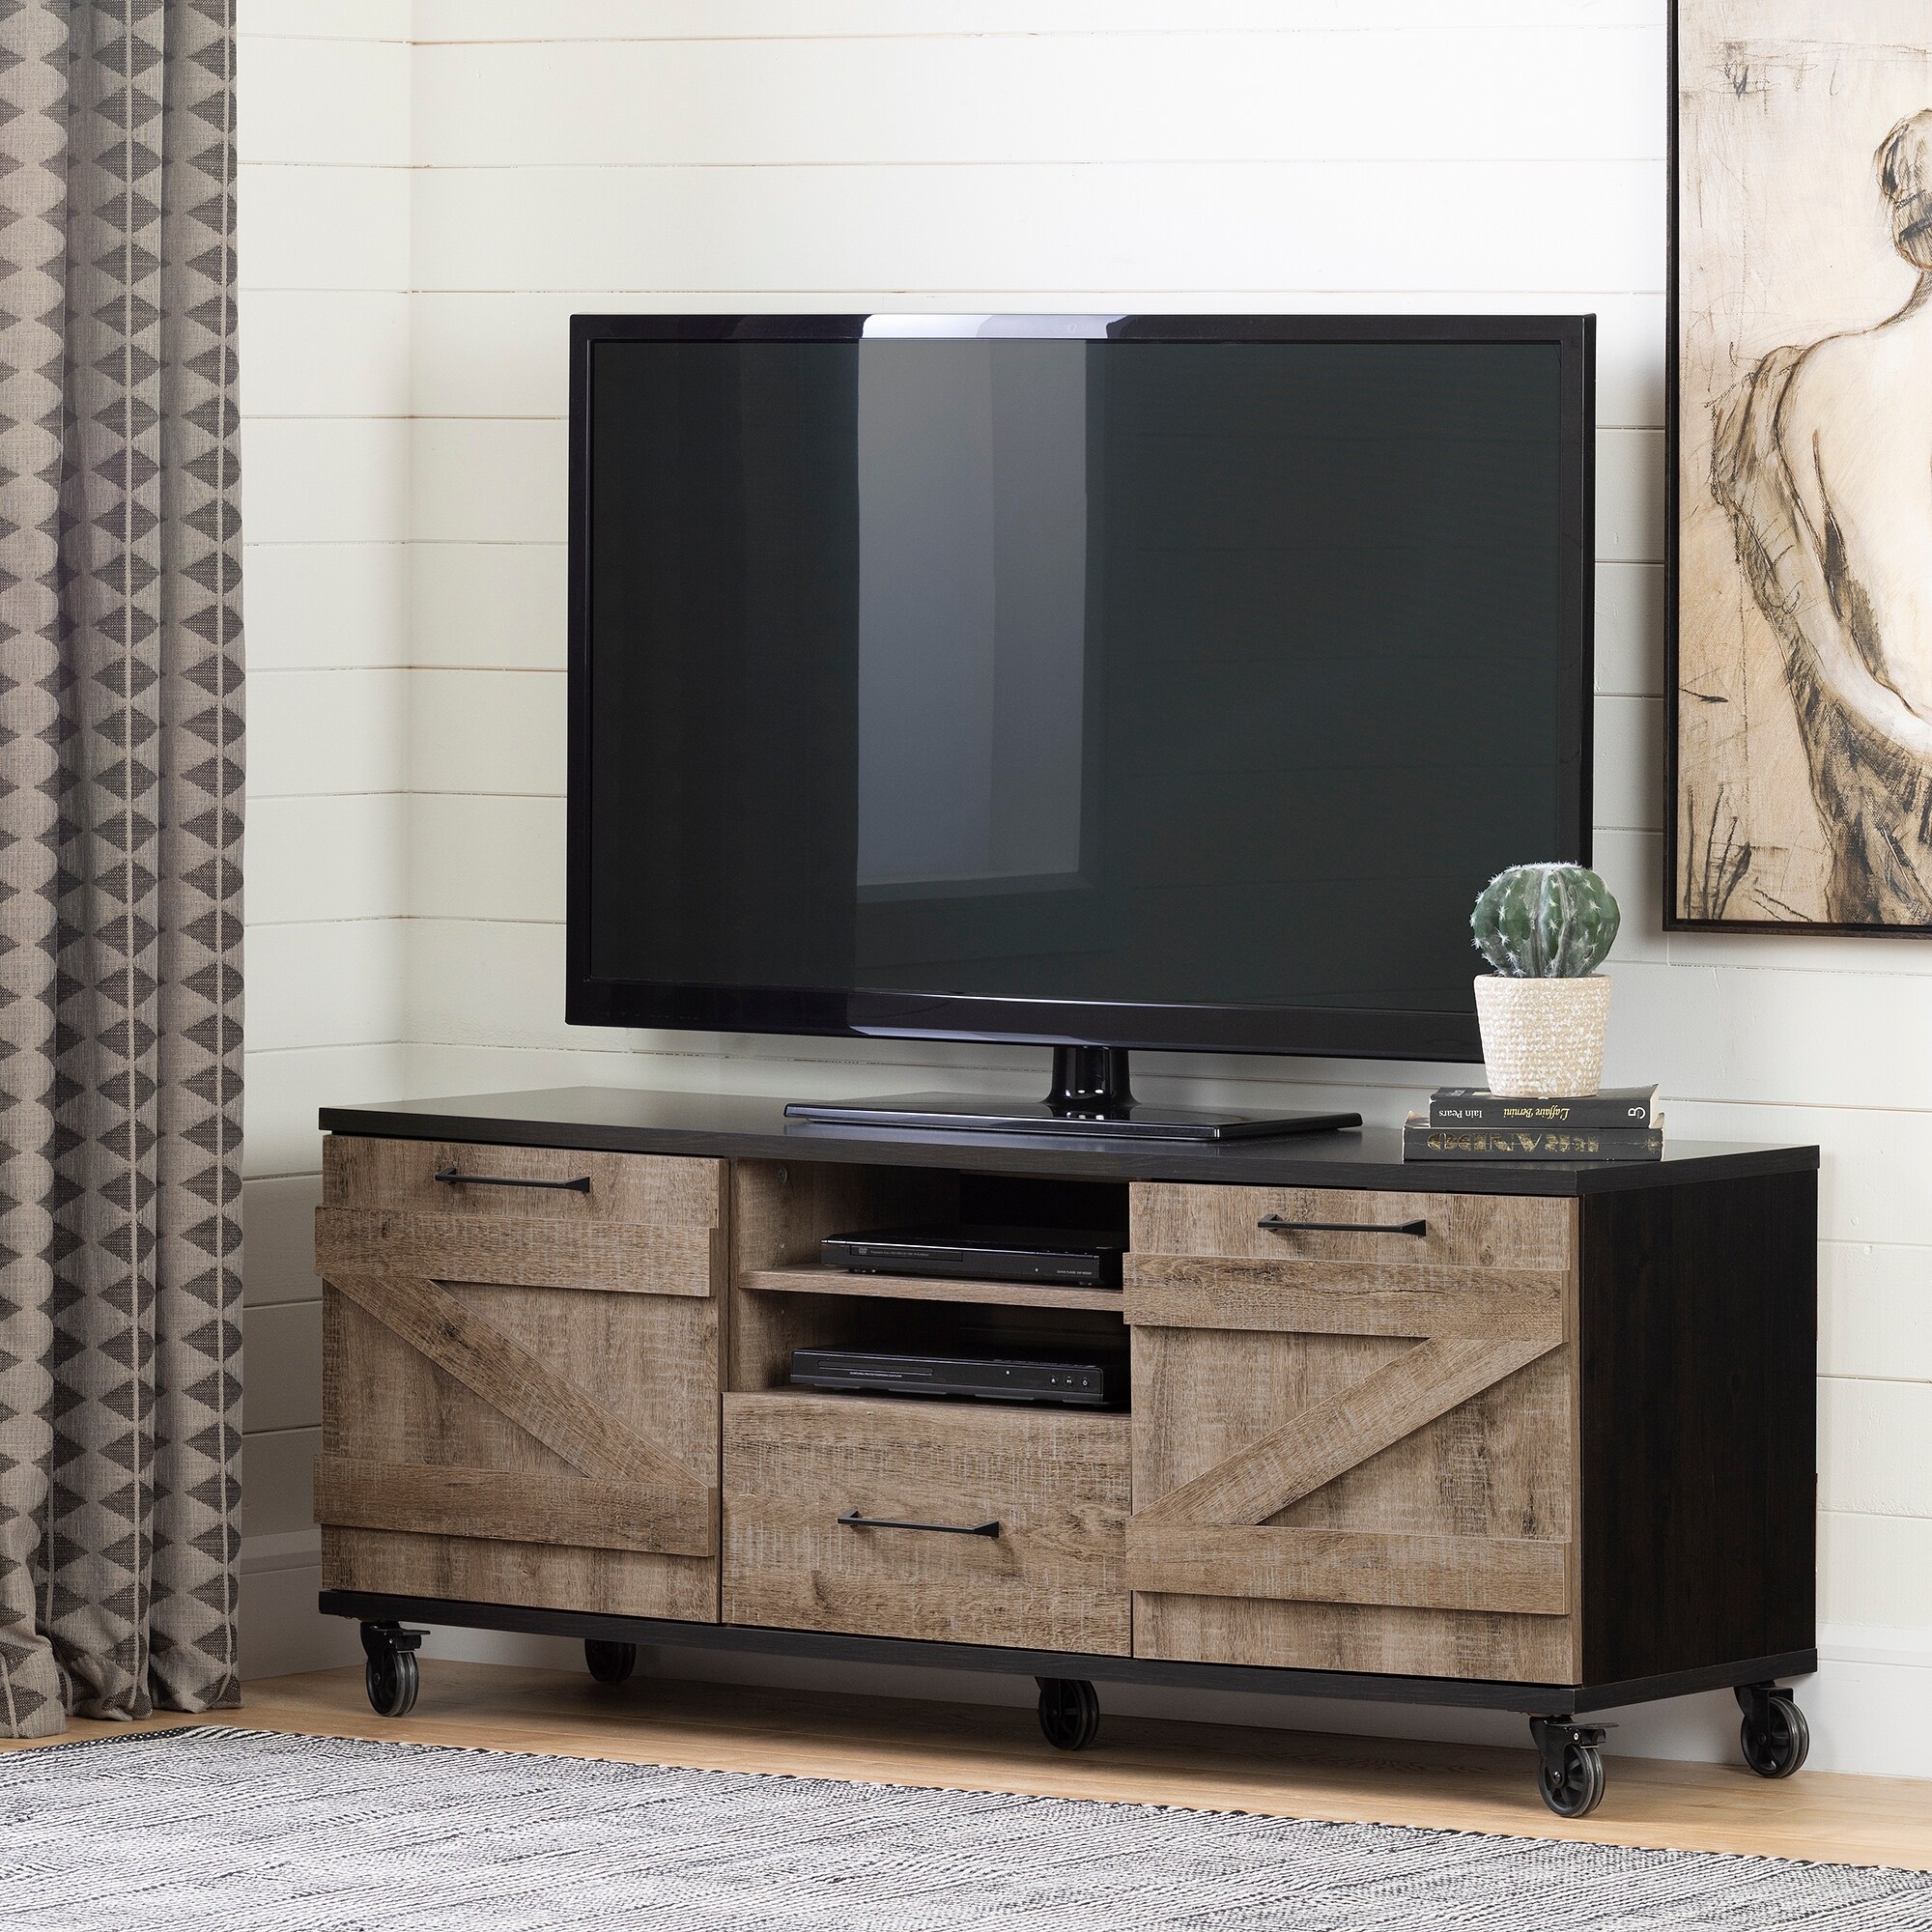 Valet Modern Industrial Living Room TV Stand With Storage On Wheels 65 Inch Overstock 22080709